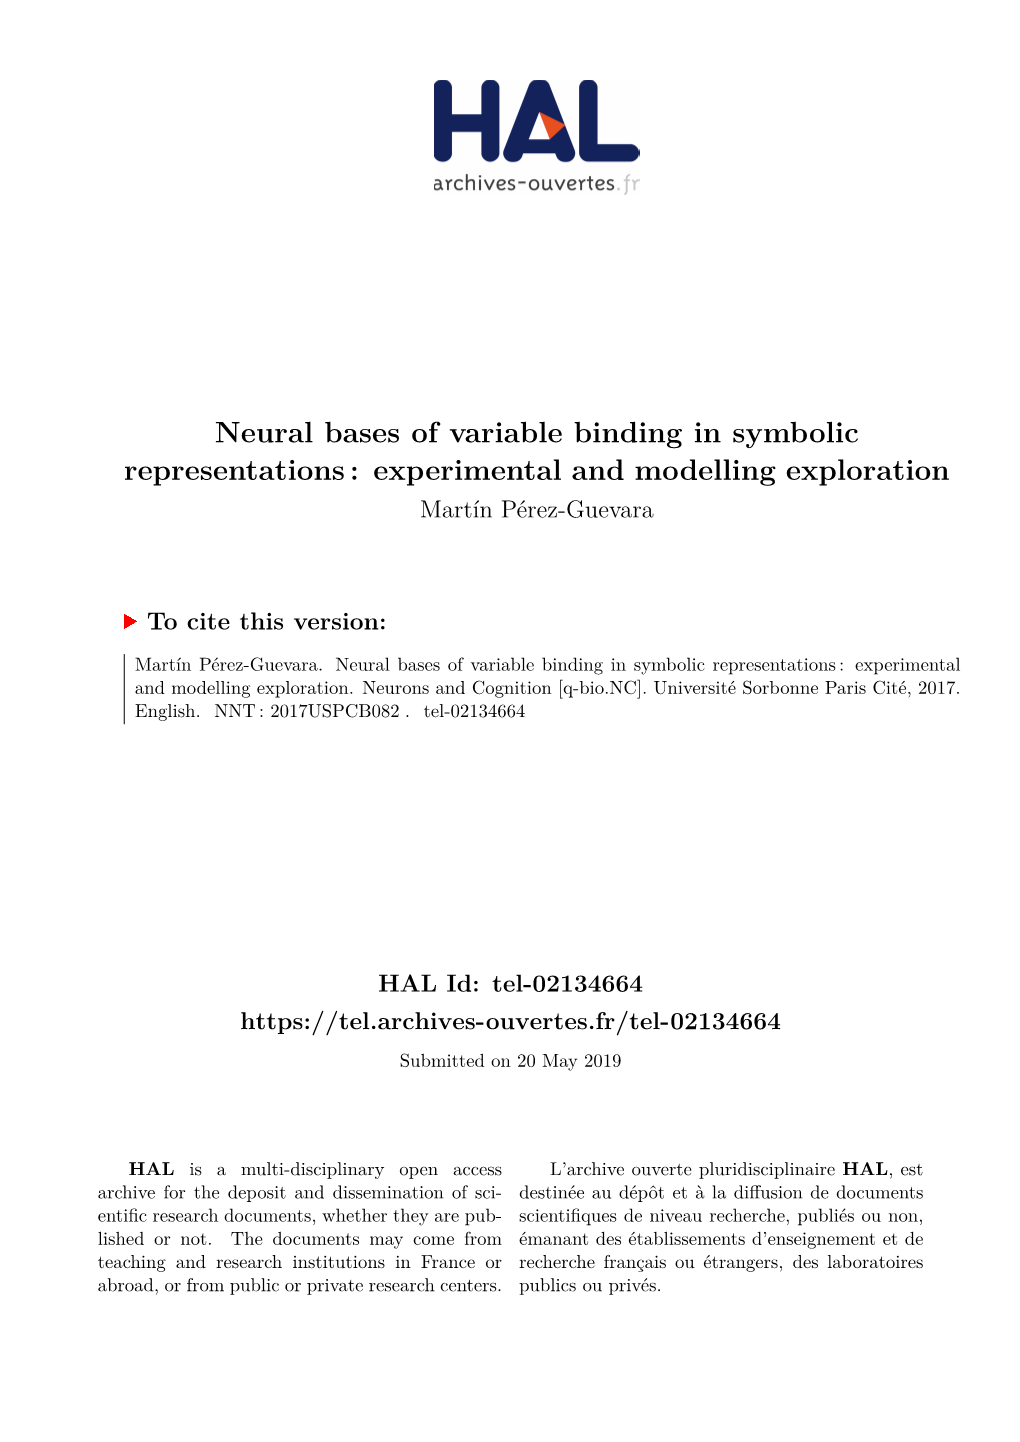 Neural Bases of Variable Binding in Symbolic Representations: Experimental and Modelling Exploration